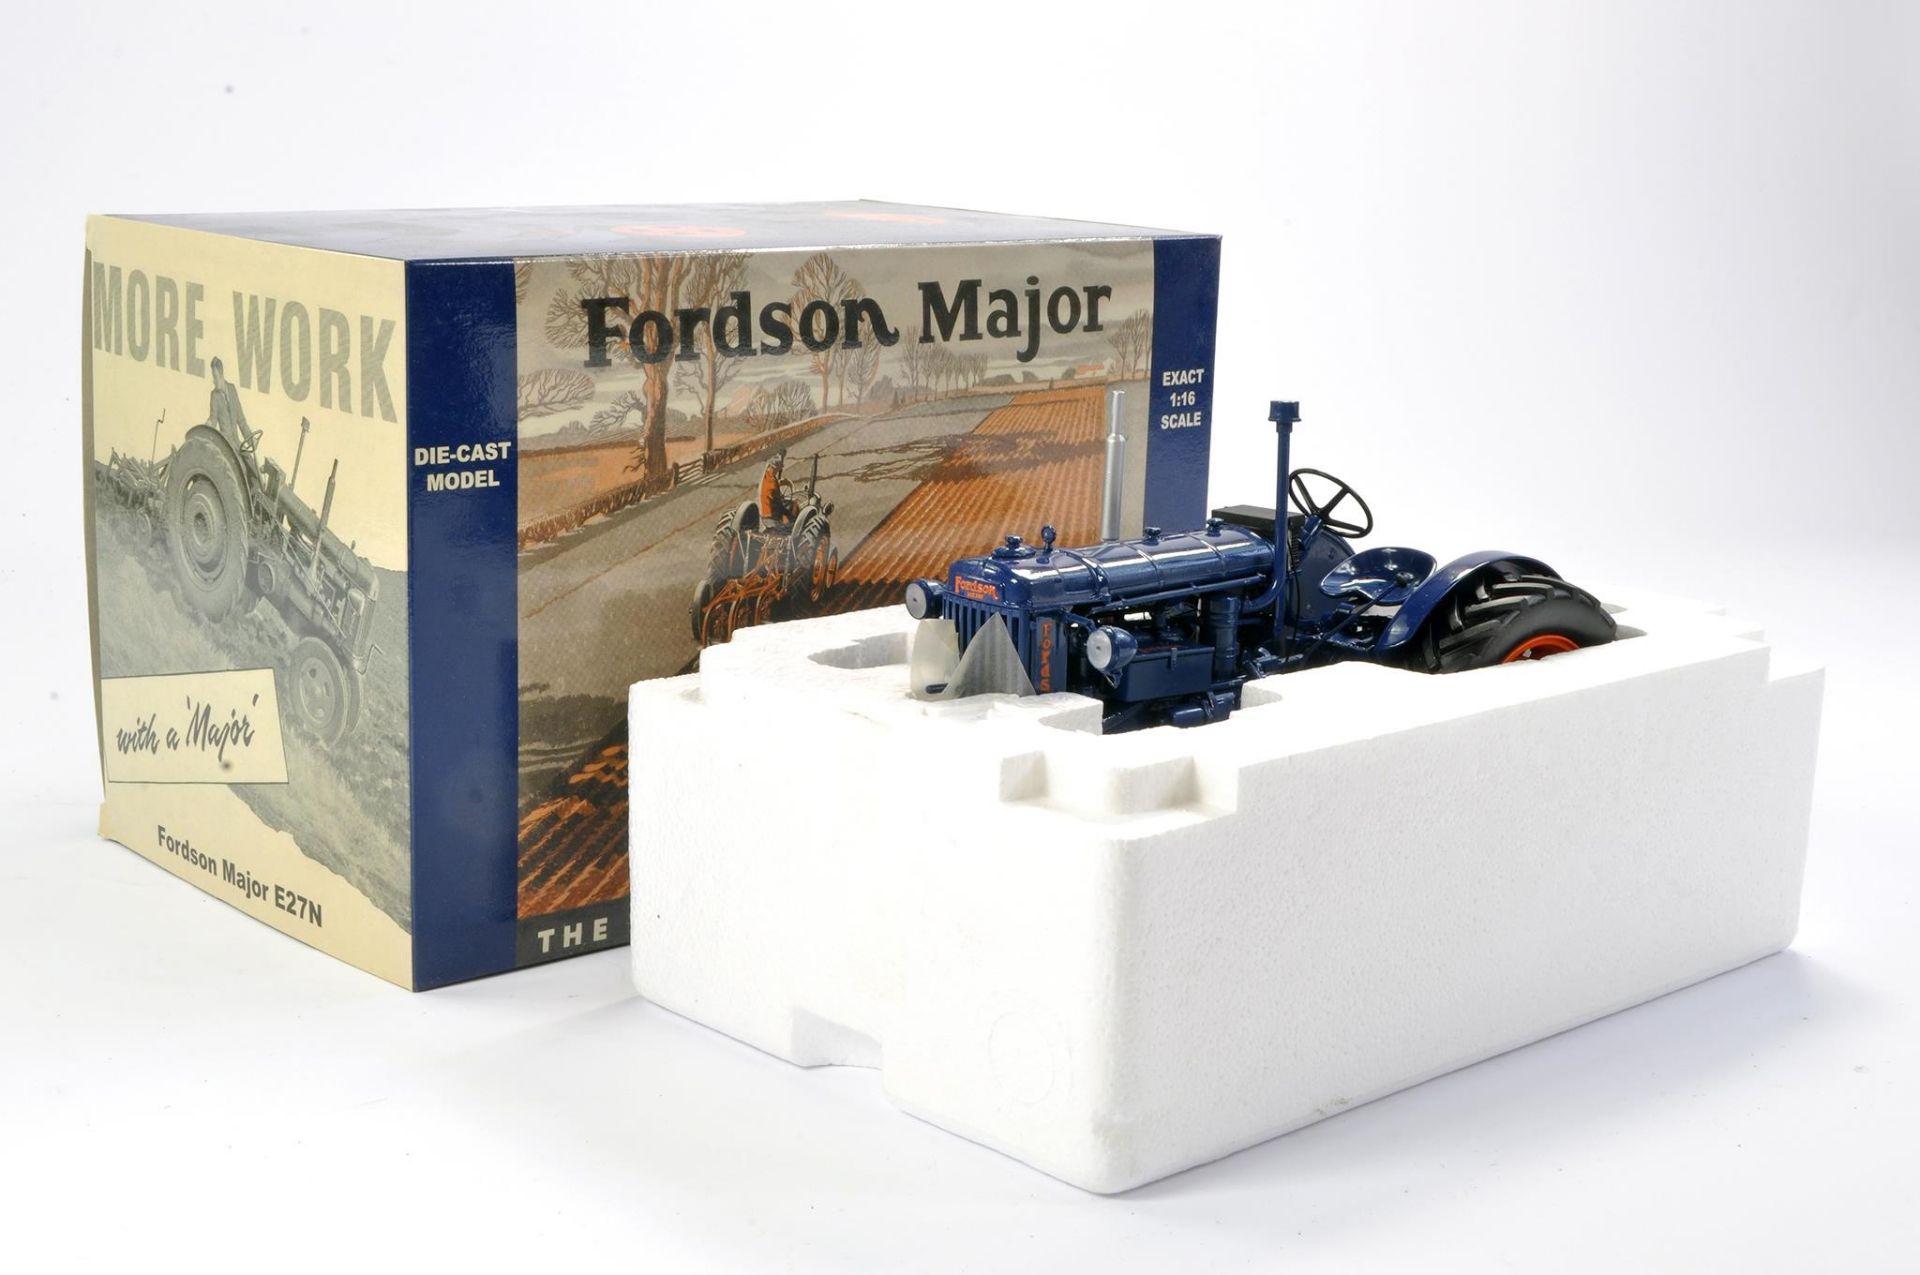 Universal Hobbies 1/16 Farm issue comprising Fordson Major E27N Tractor, Broadacre Models Version.